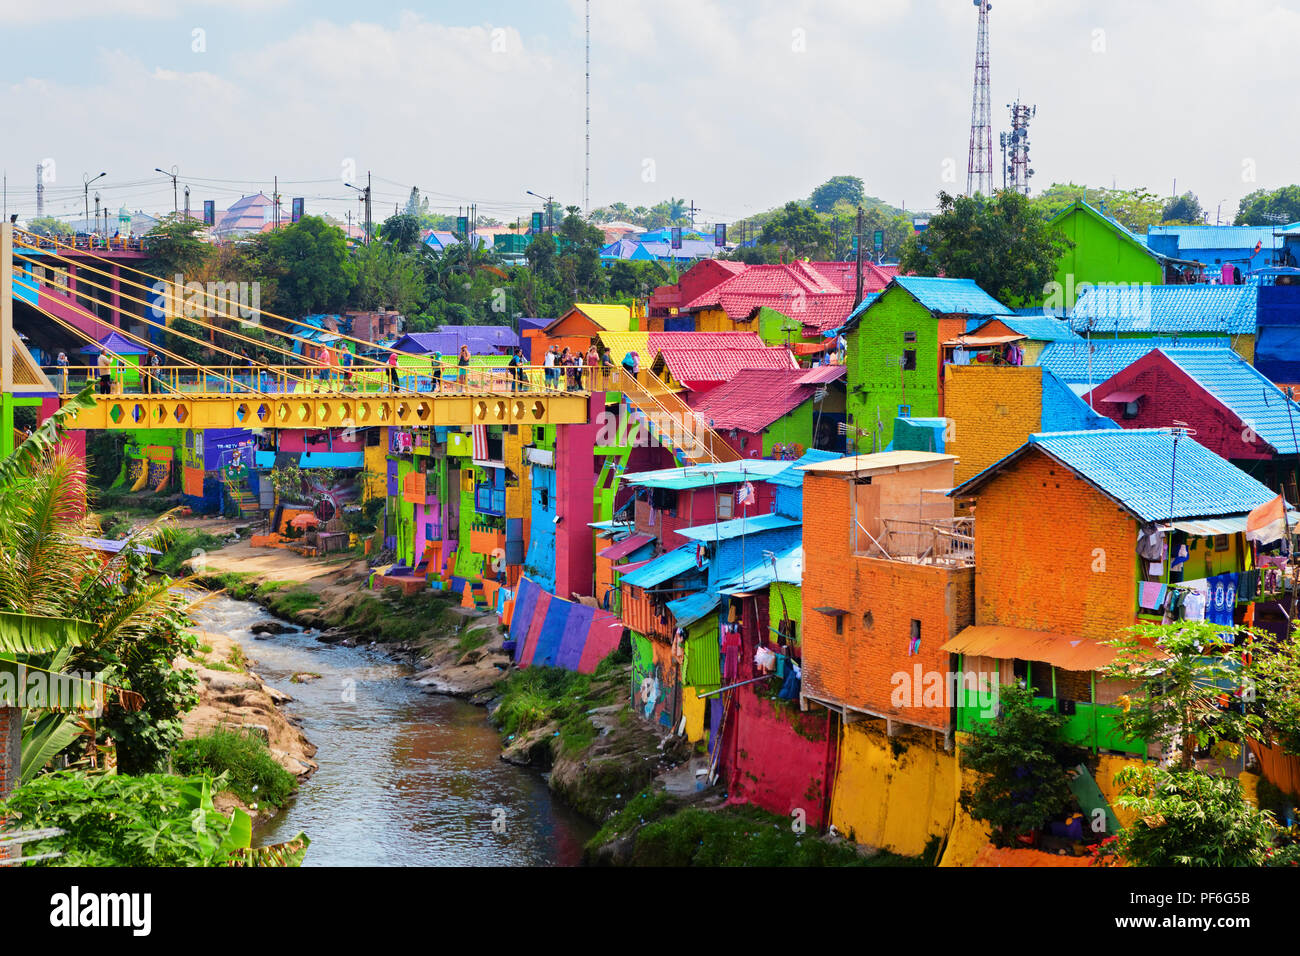 Malang, Indonesia - July 12, 2018: Jodipan village with painted